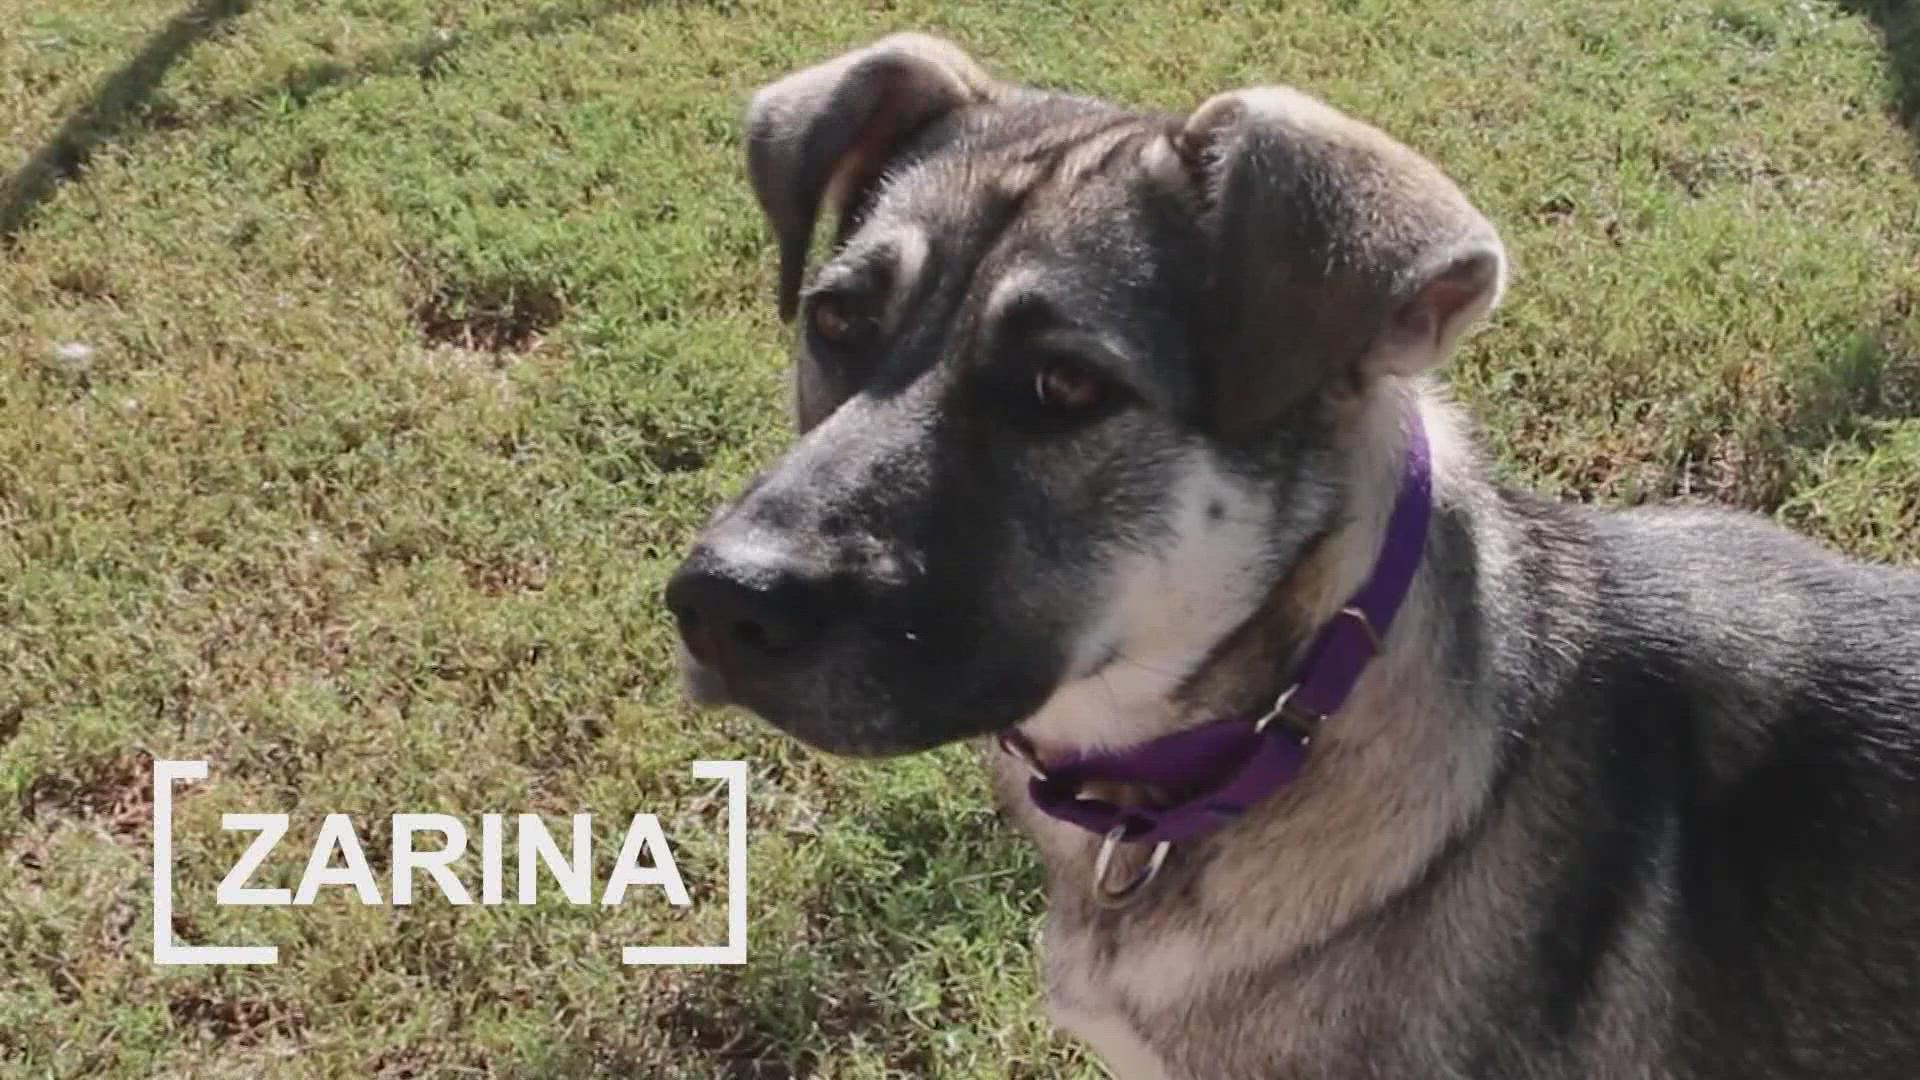 Zarina is up for adoption in Dallas.